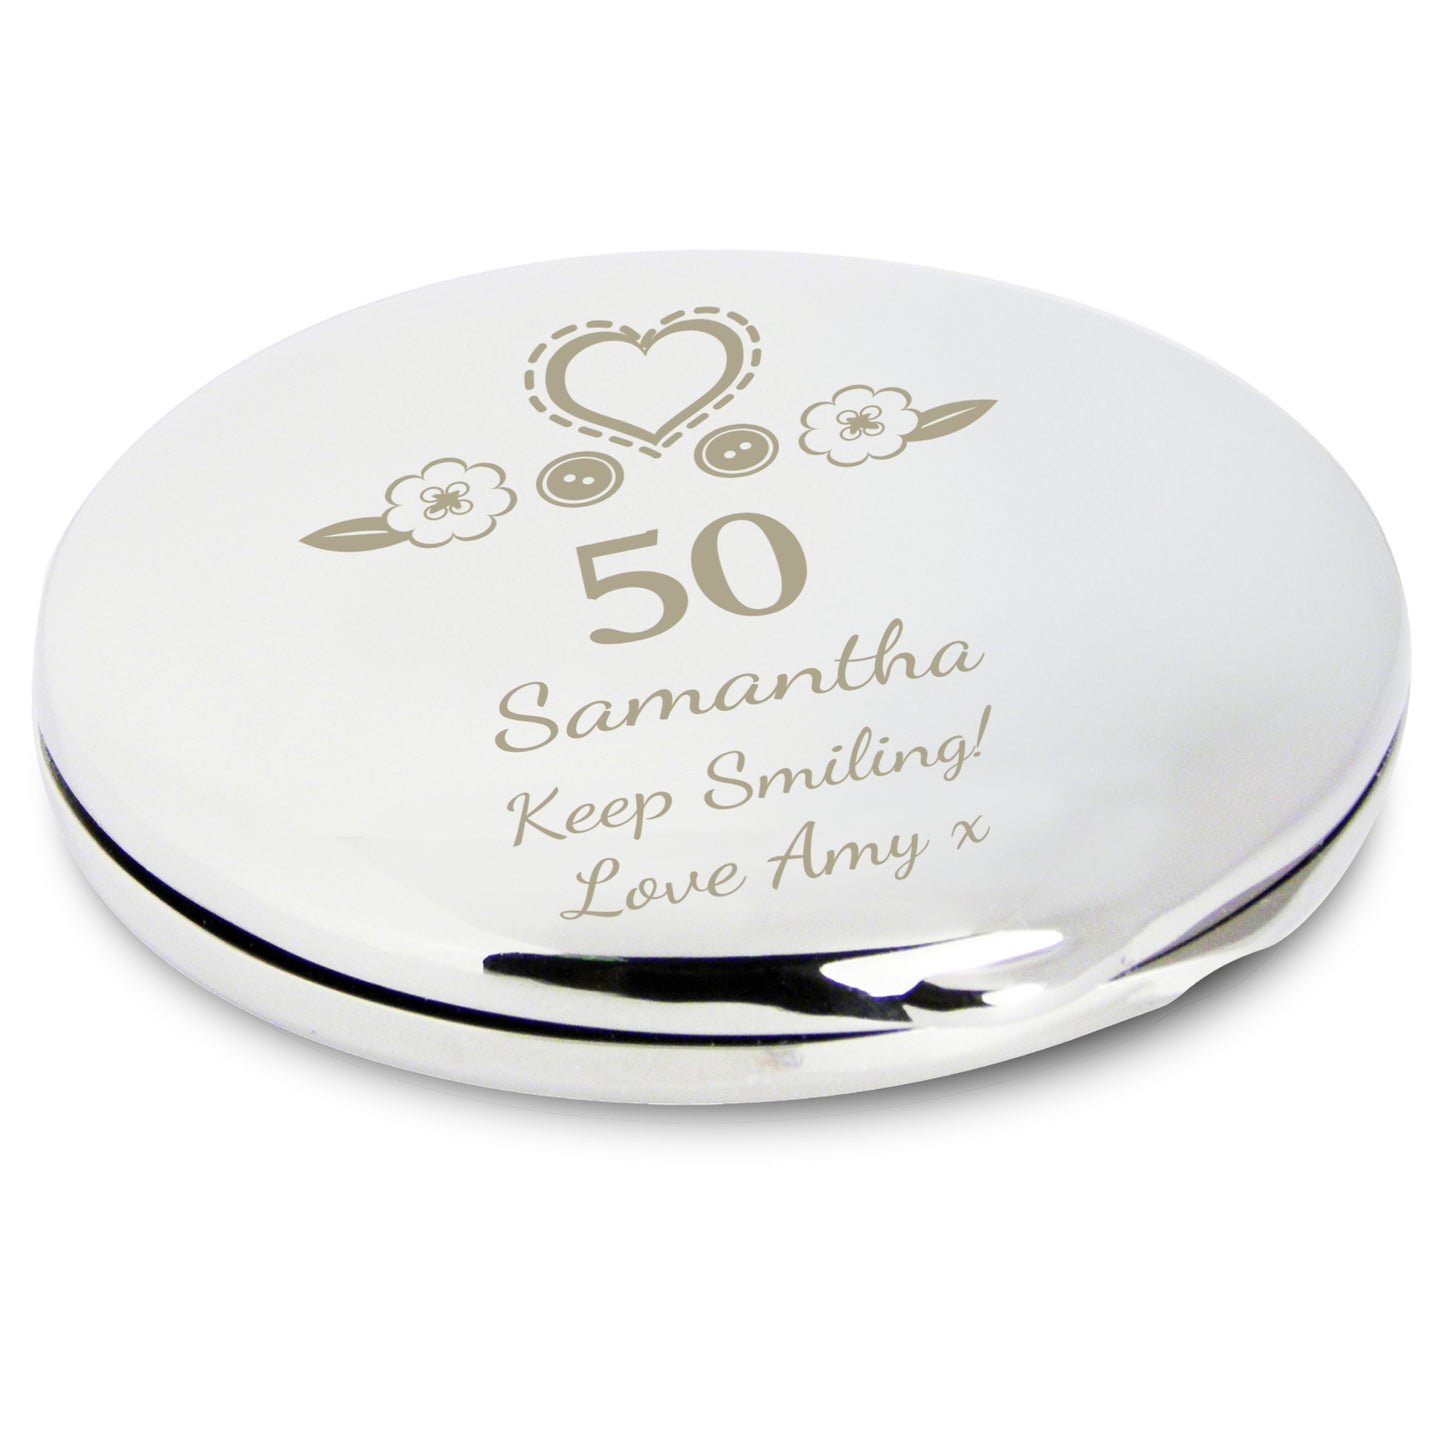 Personalised Birthday Craft Compact Mirror - Personalise It!